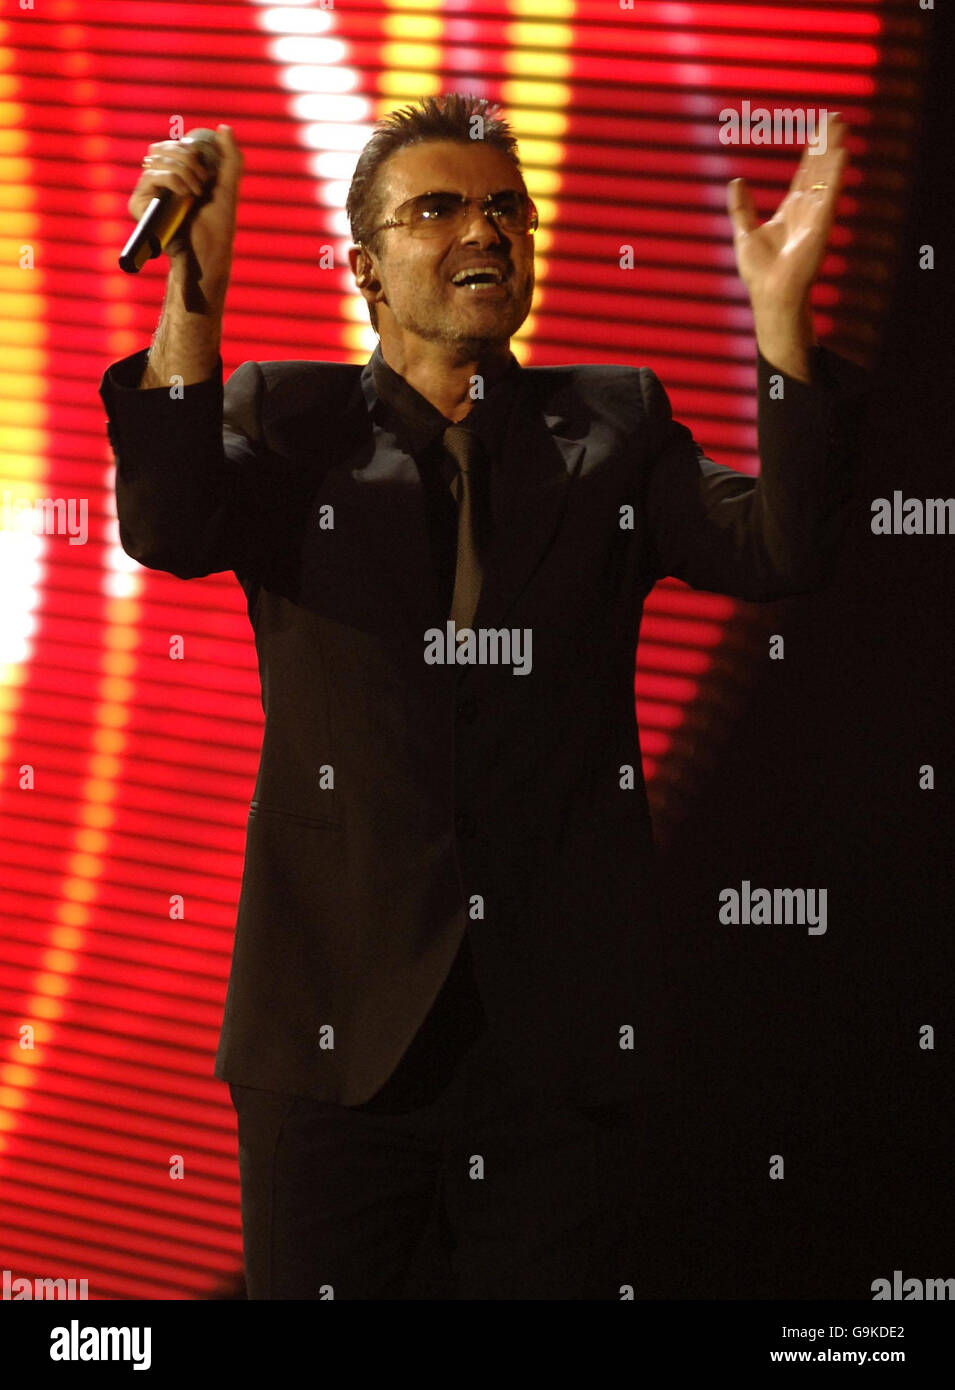 Singer George Michael performs at the MEN Arena in Manchester during his '25 Live' world tour. Stock Photo